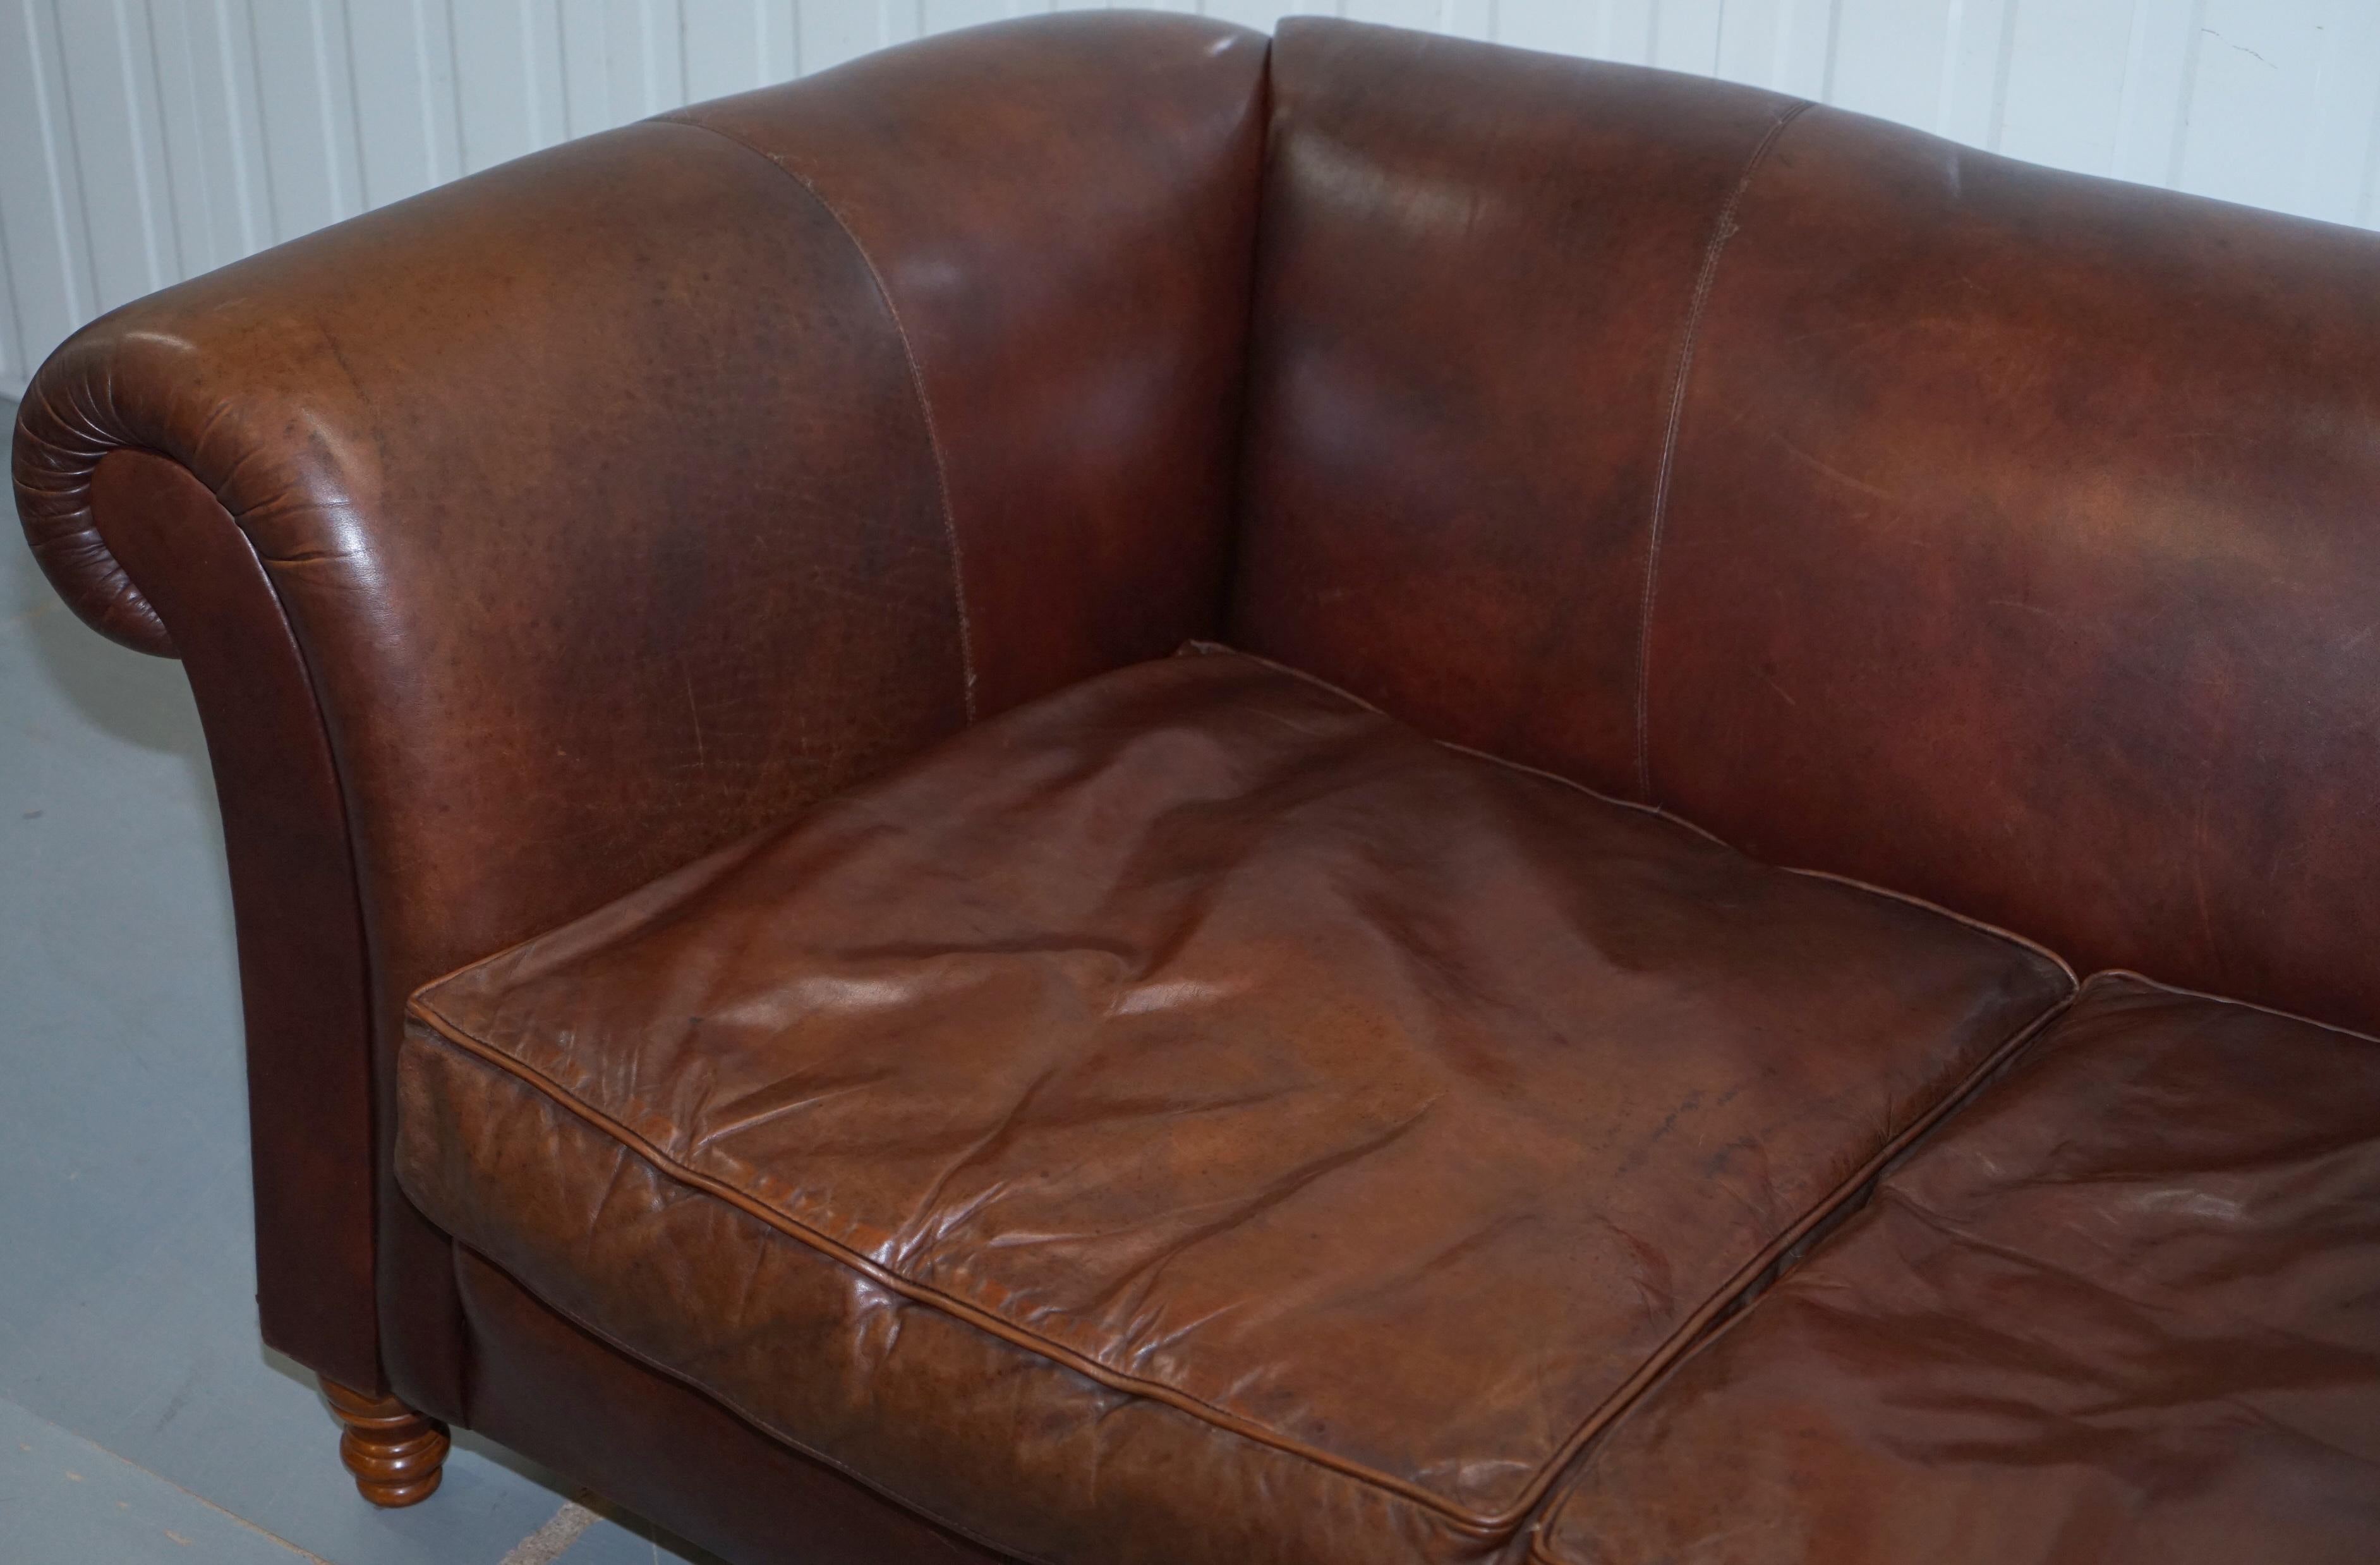 Hand-Crafted Large Buffalo Vintage Brown Leather Sofa Feather Filled Cushions Coil Sprung